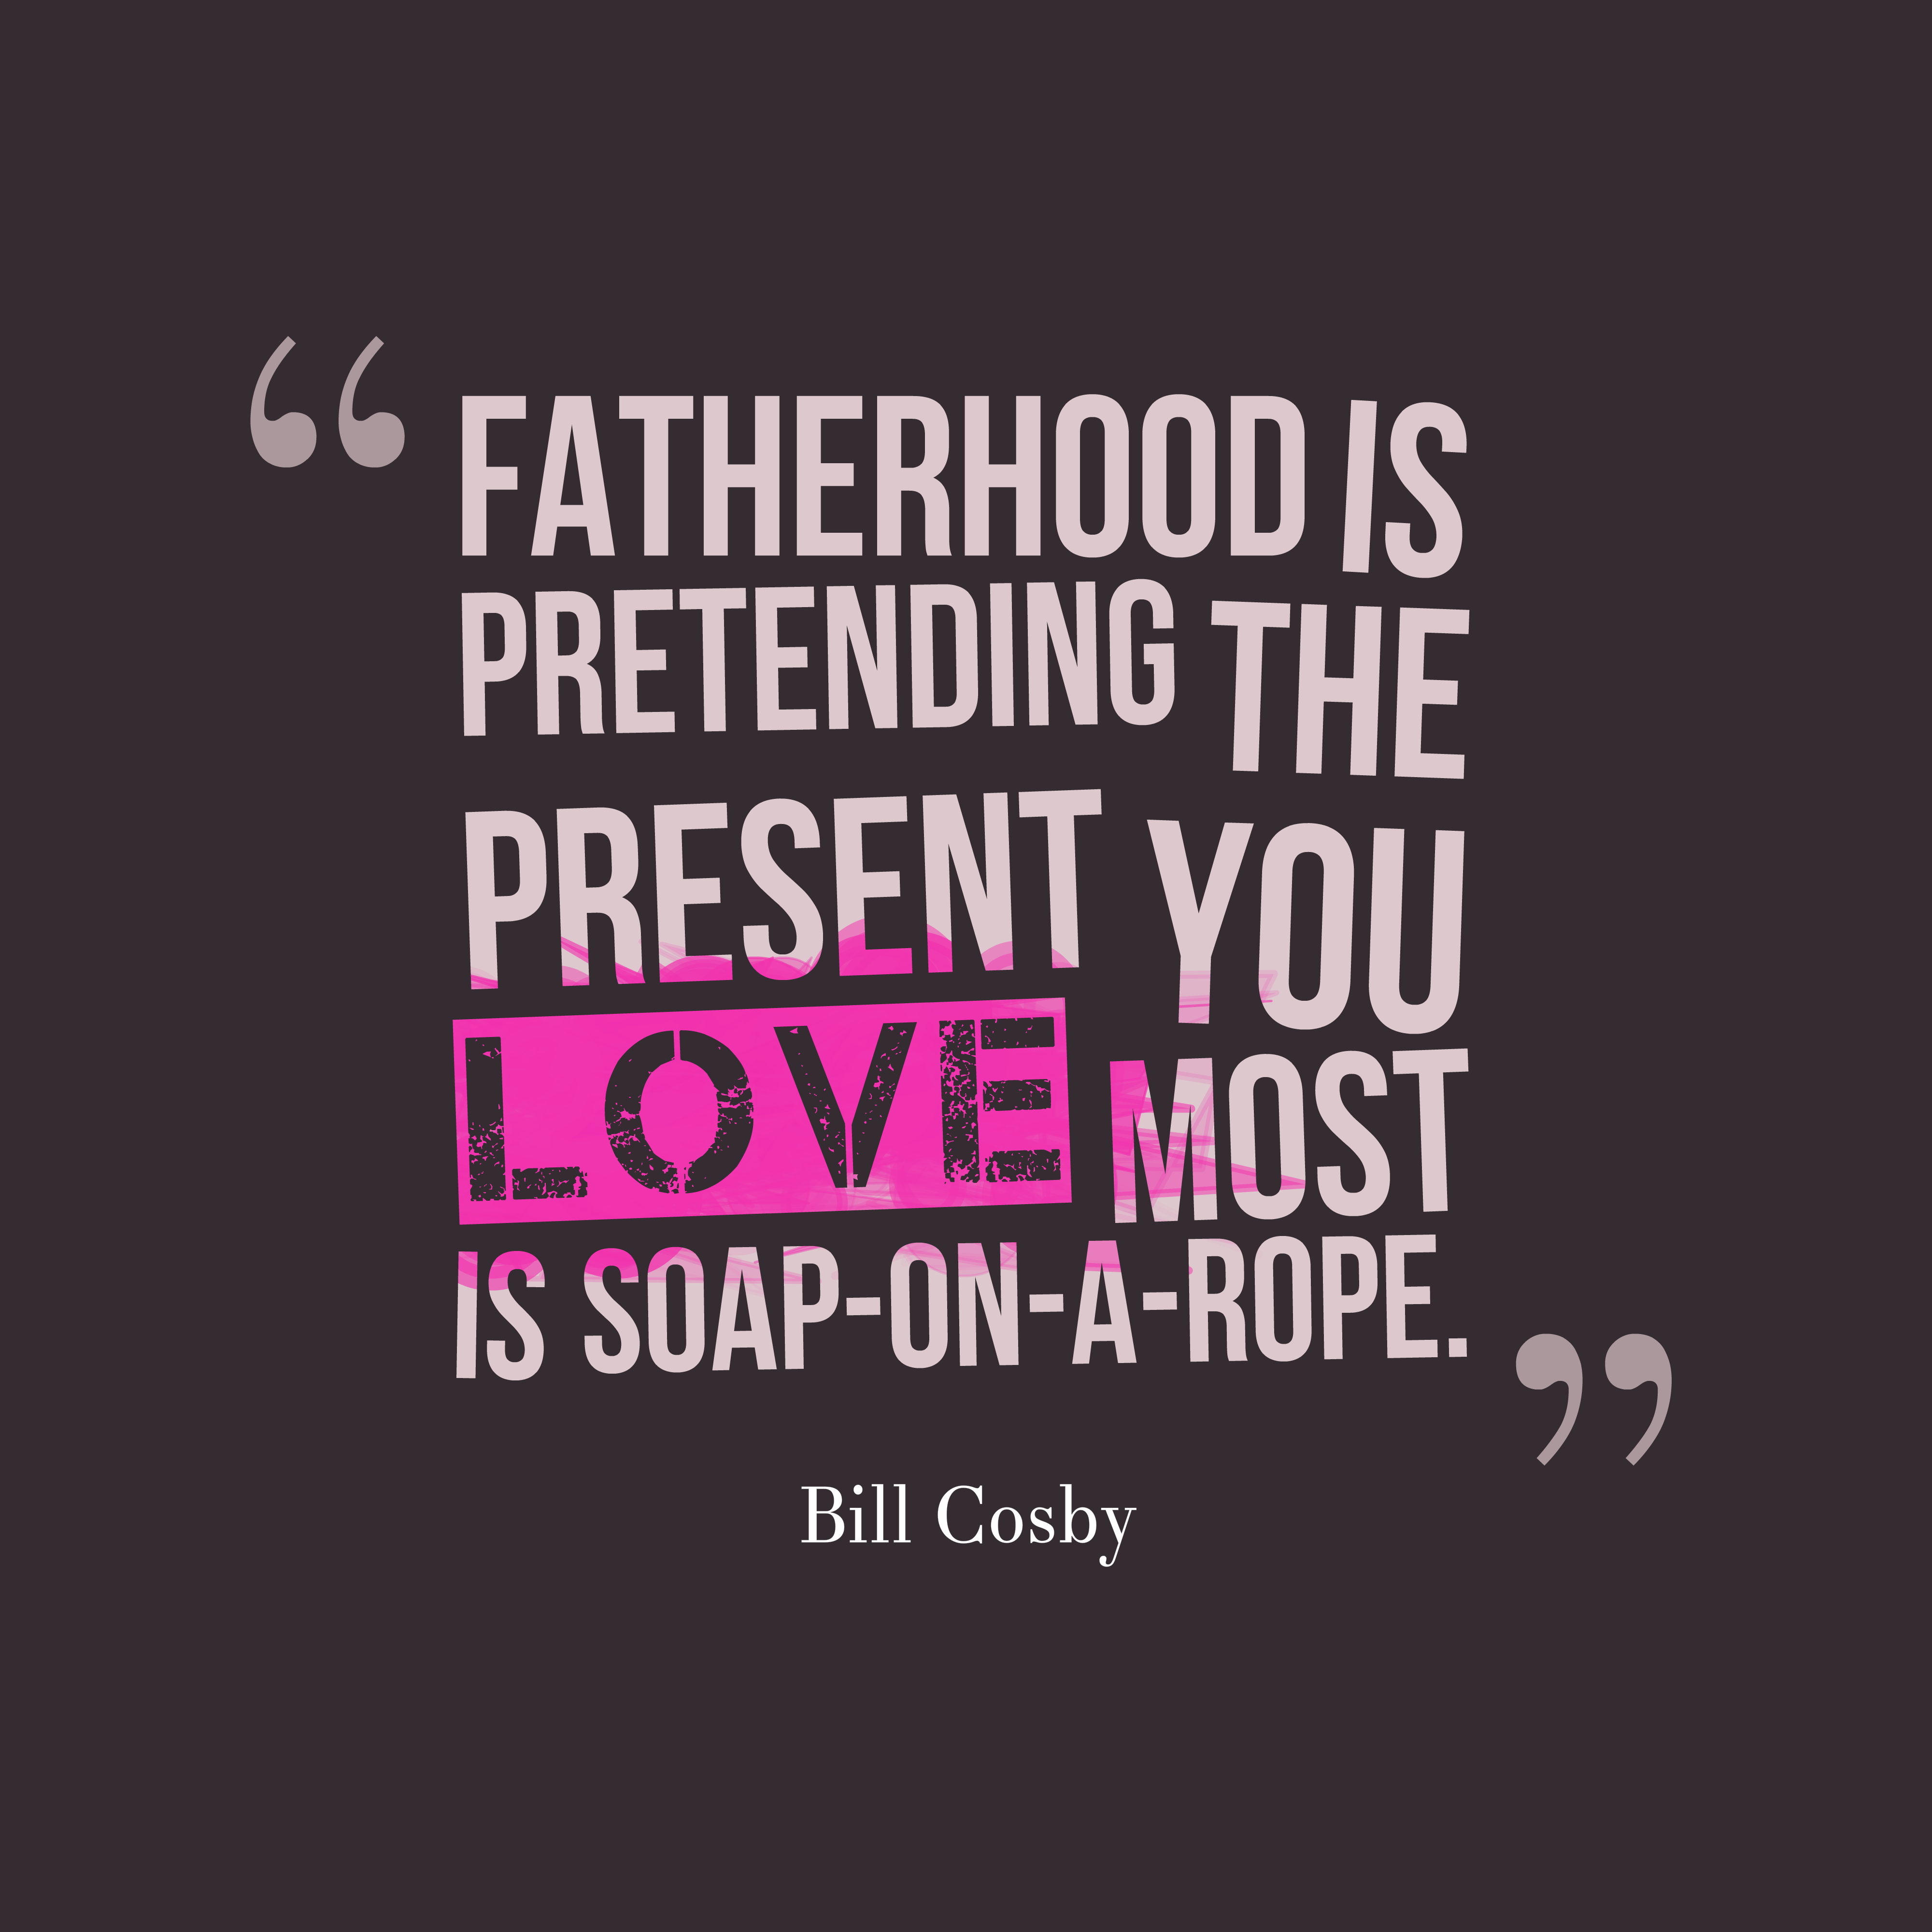 Fatherhood is pretending the present you love most is soap on a rope